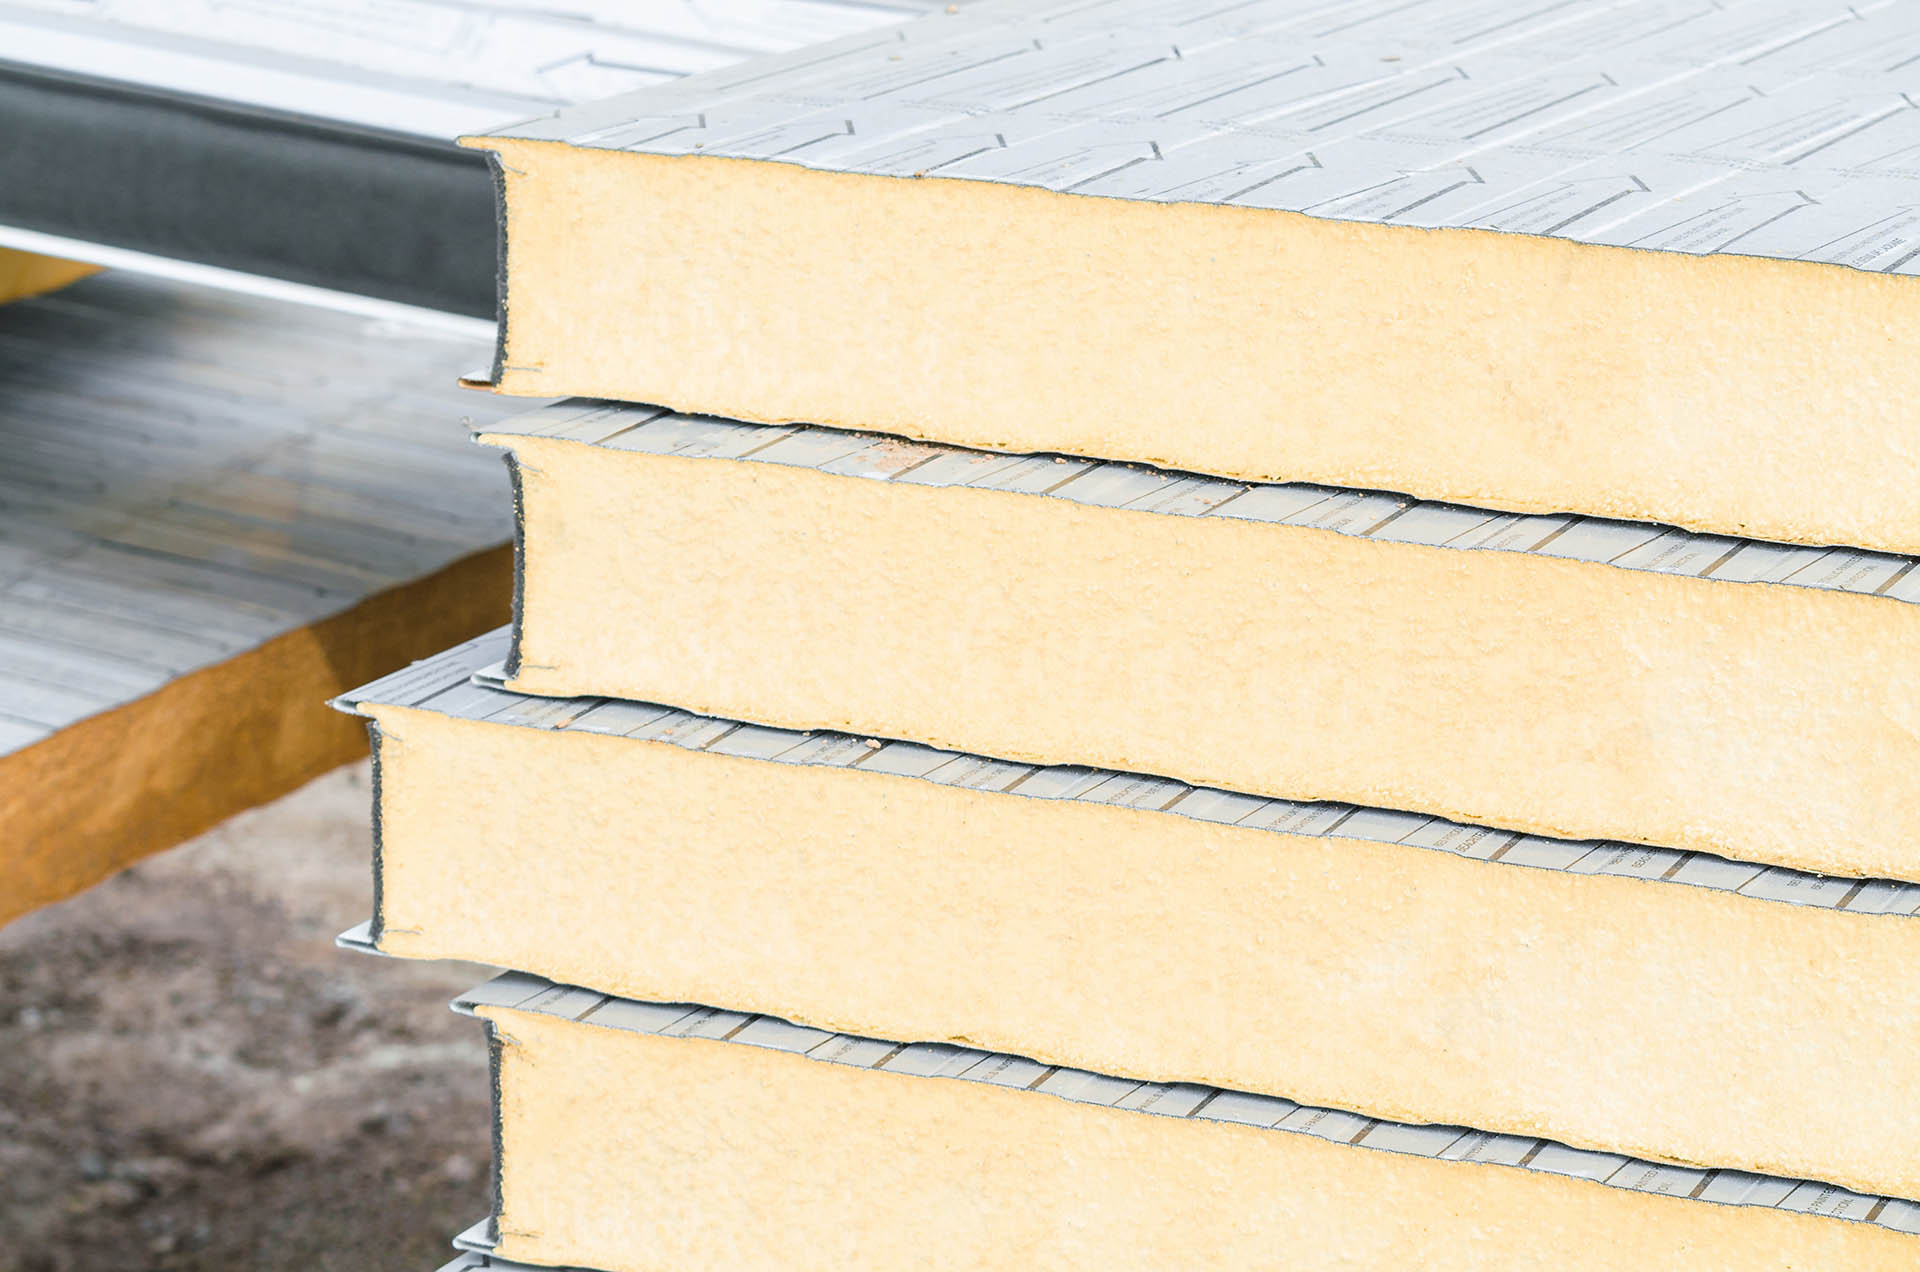 Insulation board blocks for thermal insulation - building materials